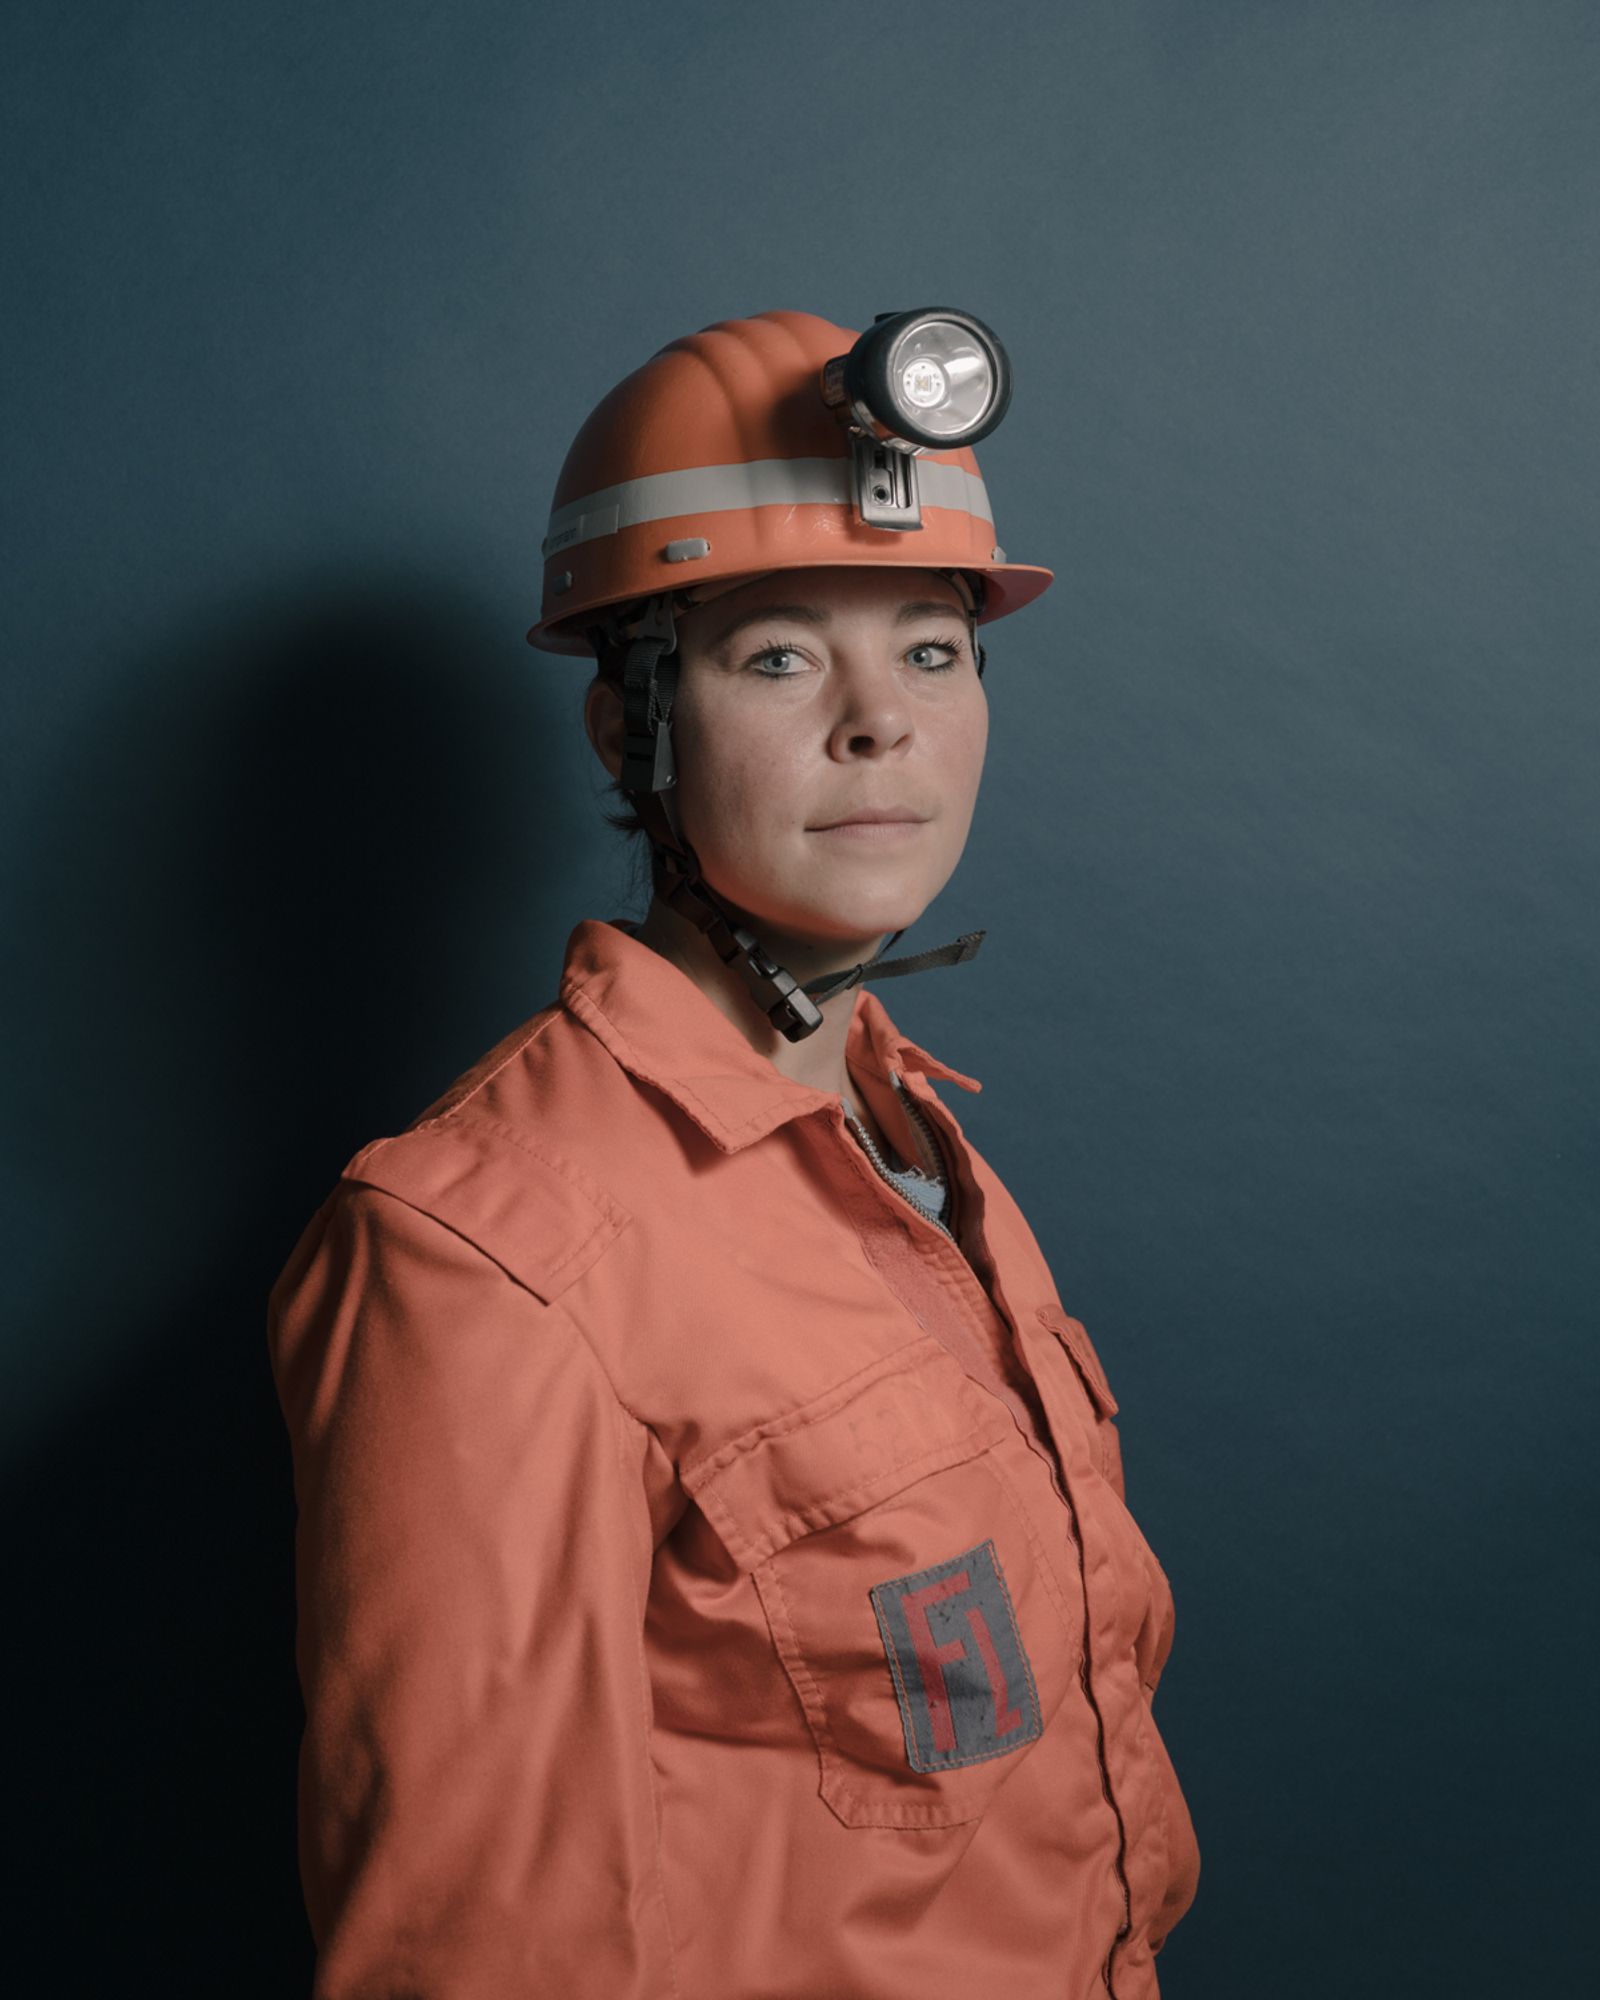 © Arne Piepke - Image from the The Last Mine Rescue photography project